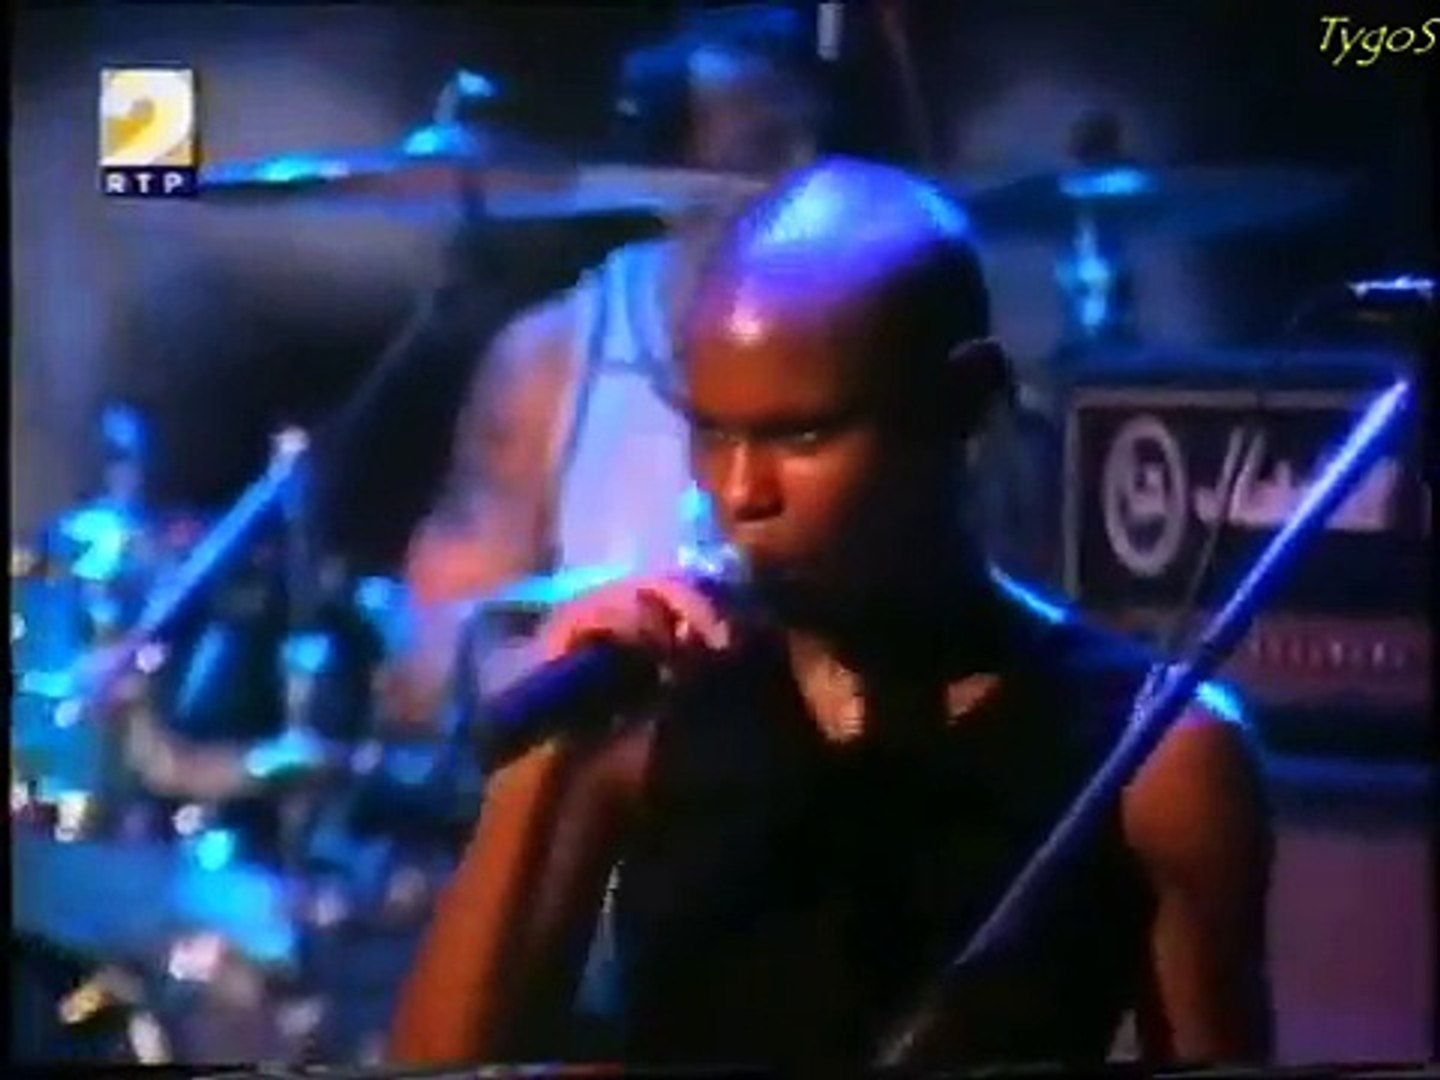 Skunk Anansie - Twisted (Everyday Hurts) - LIVE Portugal